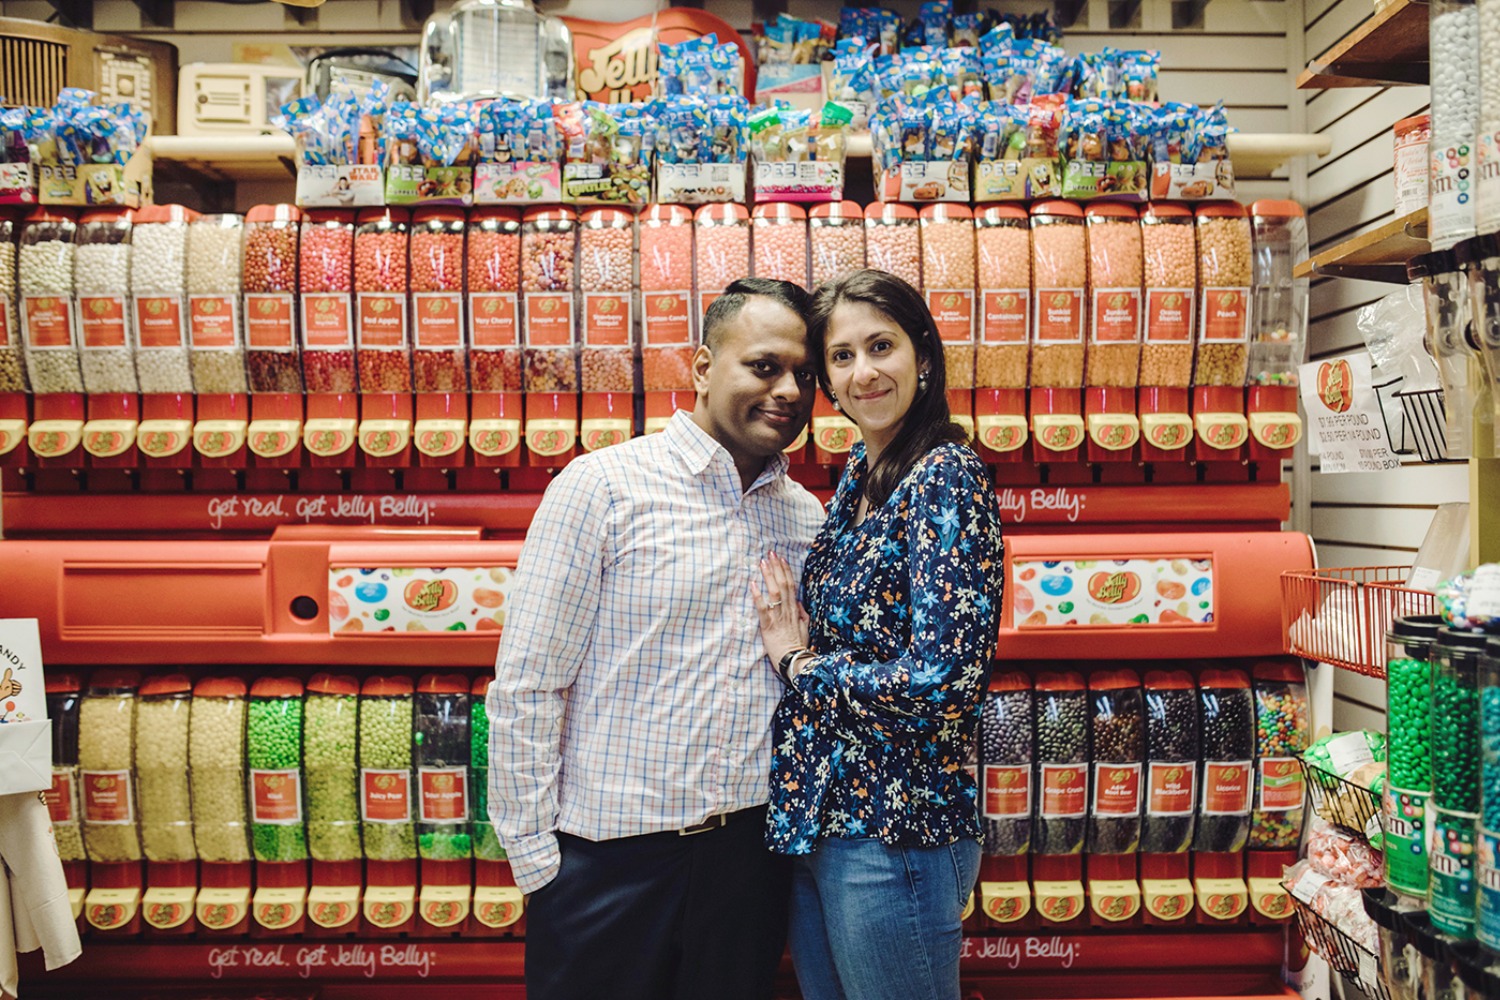 Economy Candy store engagement shoot